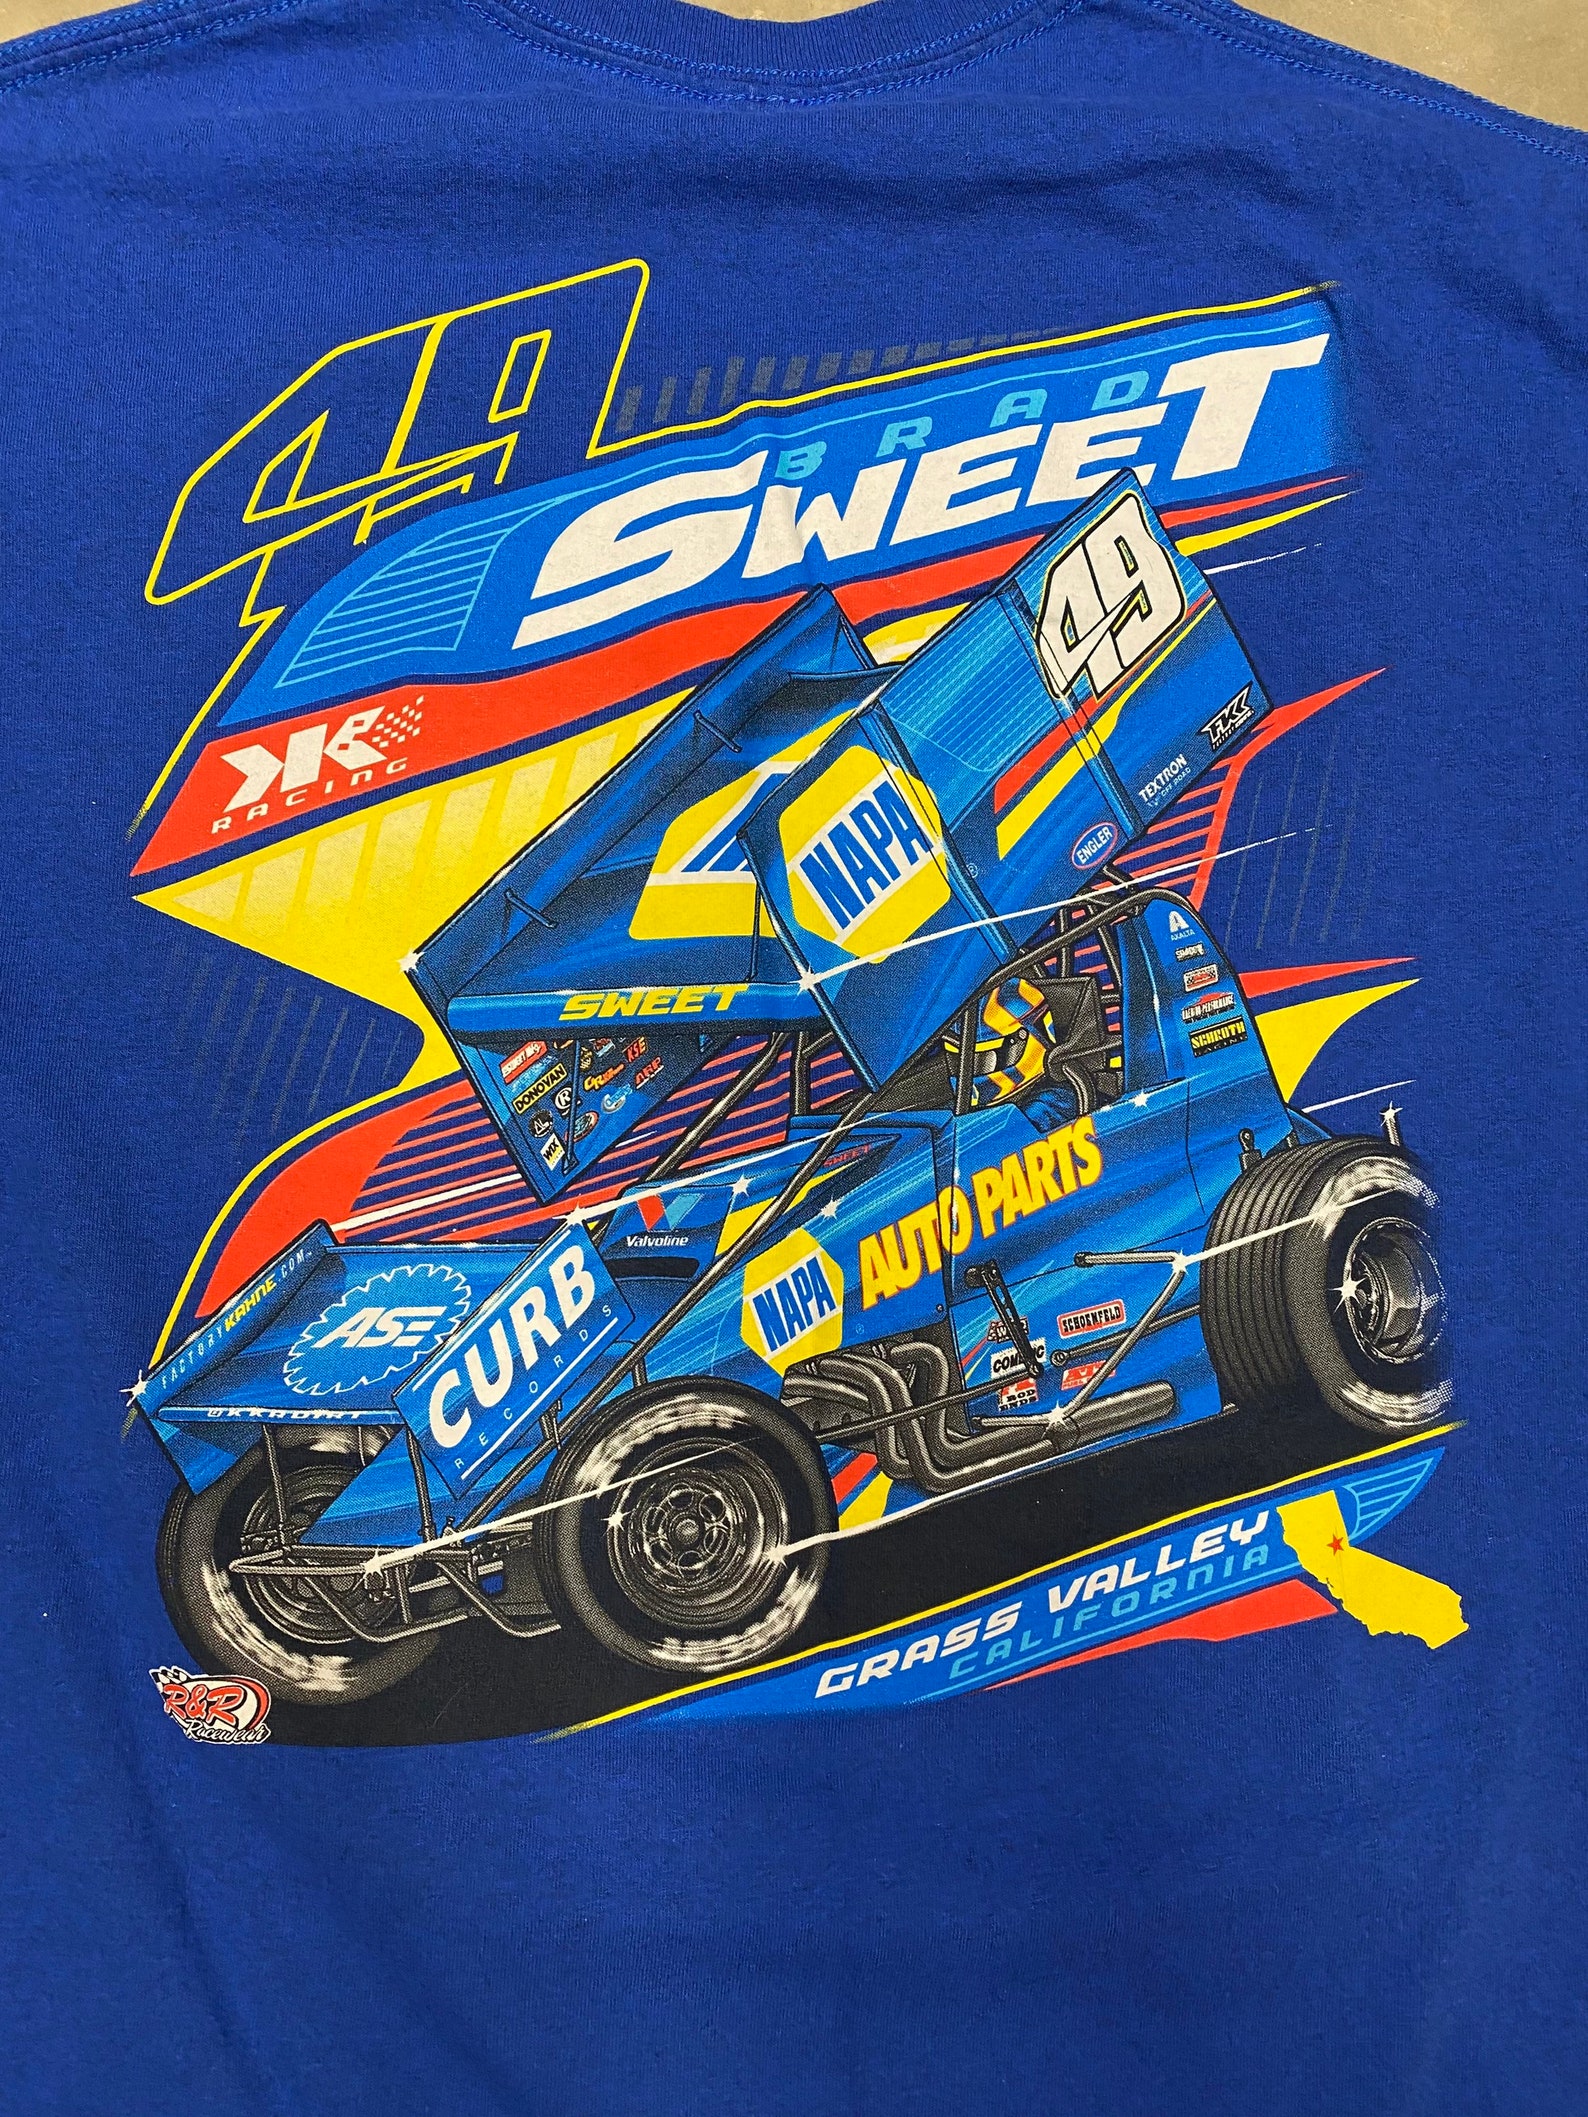 2010s Brad Sweet Kasey Kahne Racing World of Outlaws Sprint - Etsy